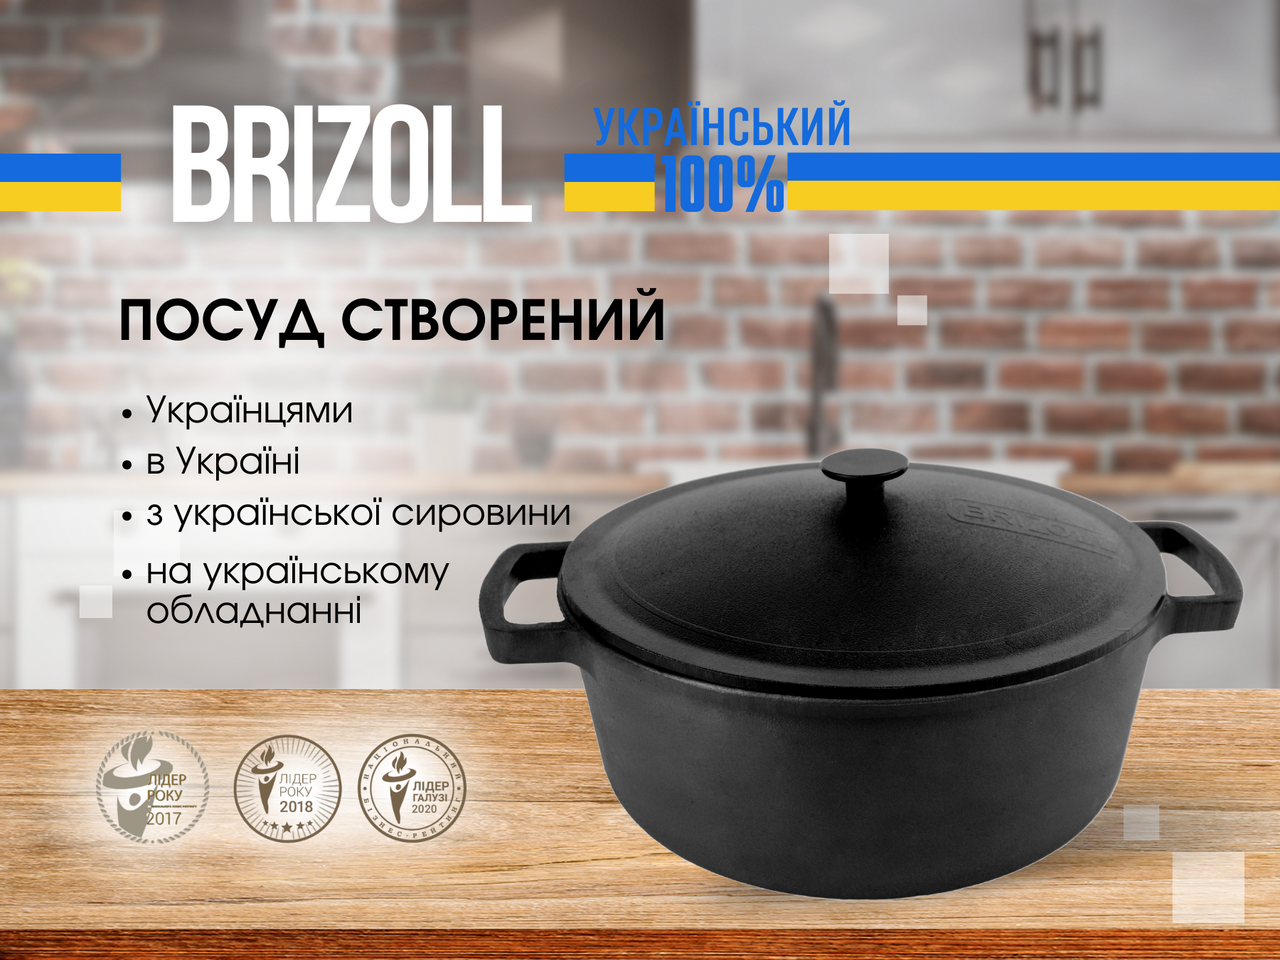 Cast iron pot of 6 liters with a cast iron lid